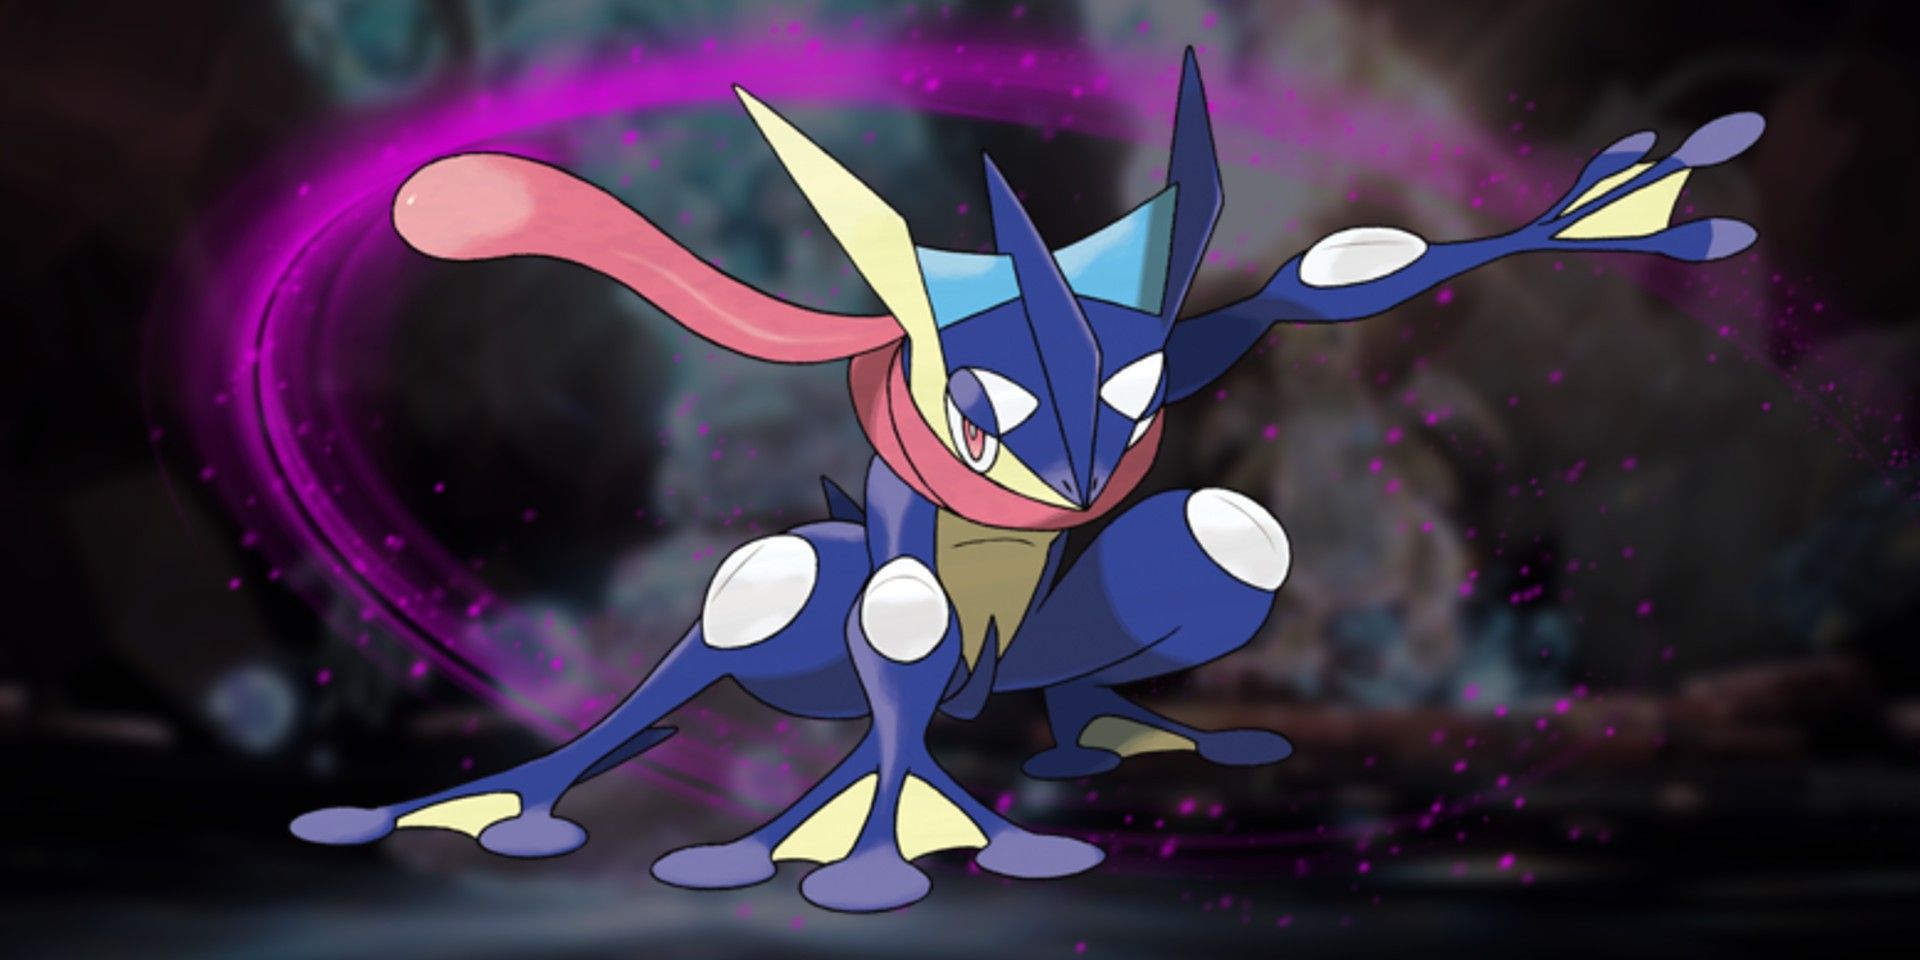 Pokemon's Greninja striking a ninja pose in the middle while a purple half circle of energy is behind it. In the background is a blurred-out Tera Raid battle against a Dragonite.